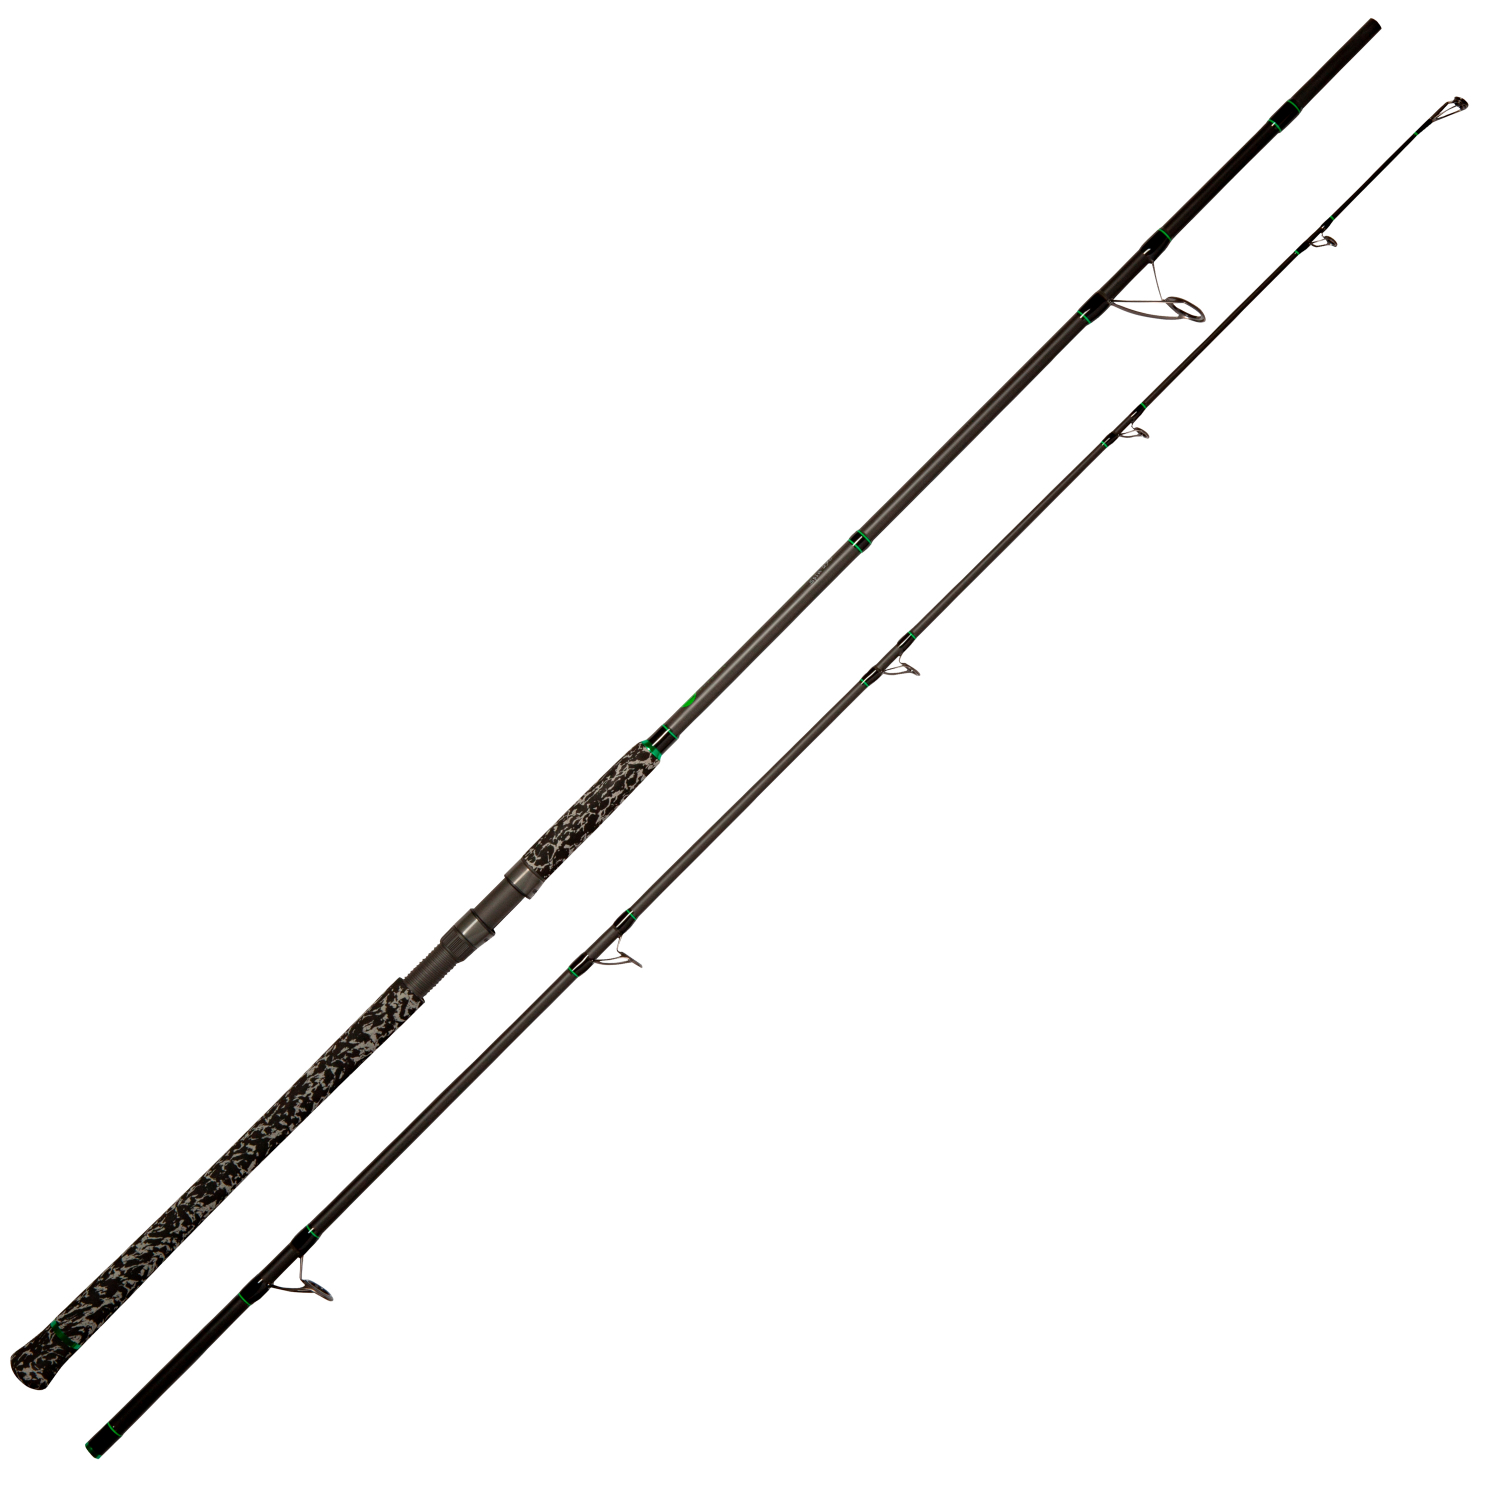 Zeck Cat-Attack catfish rod at low prices